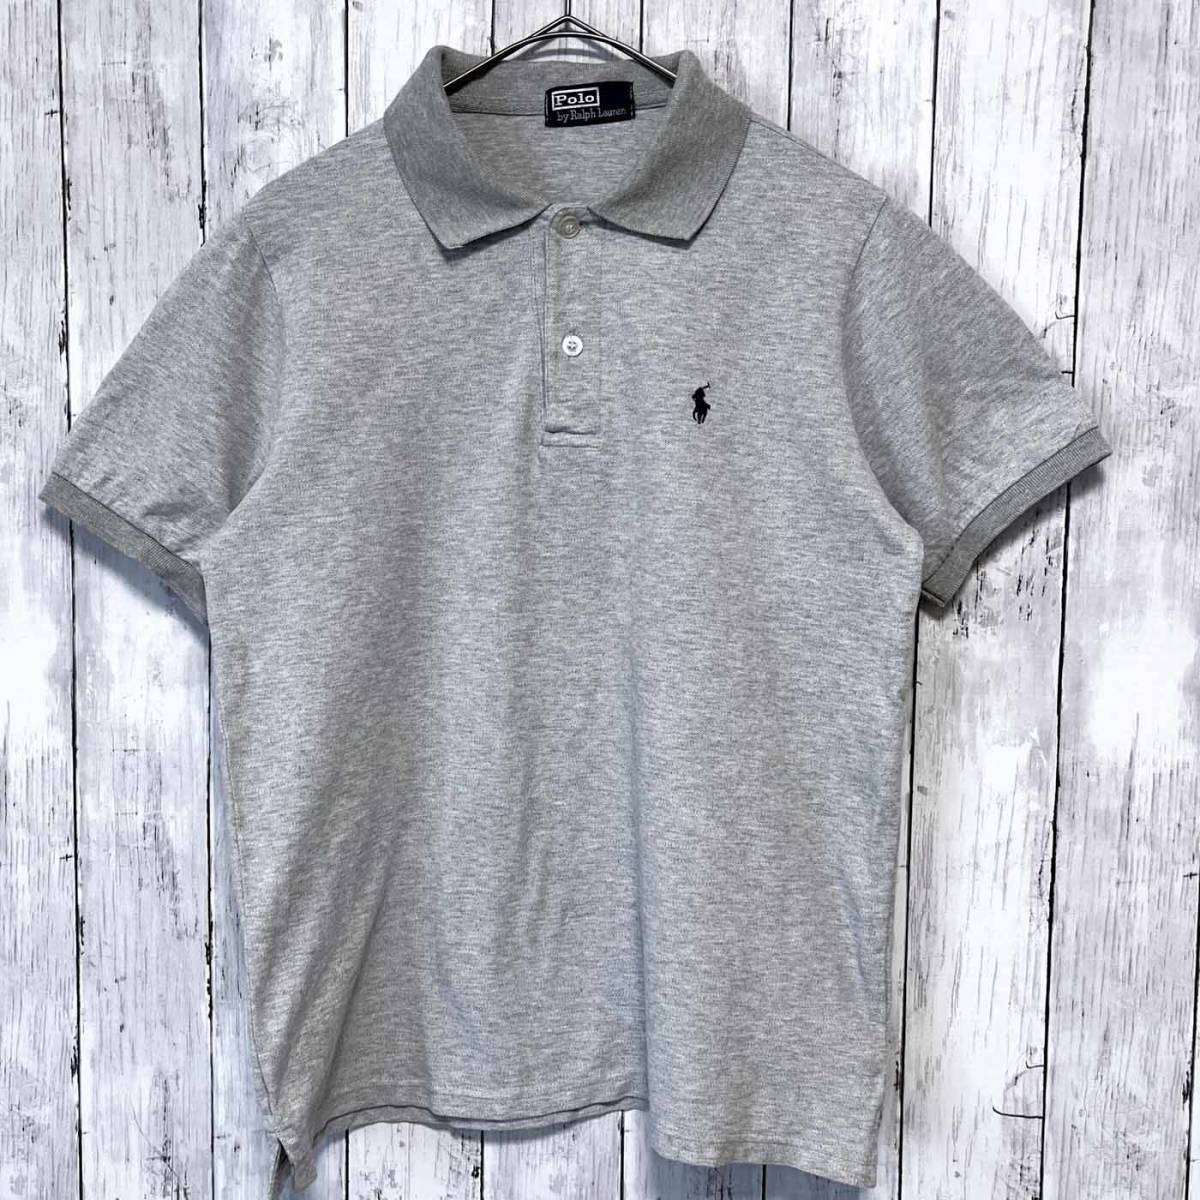  Ralph Lauren Ralph Lauren polo-shirt with short sleeves lady's one Point tag none (M size corresponding ) 3-354